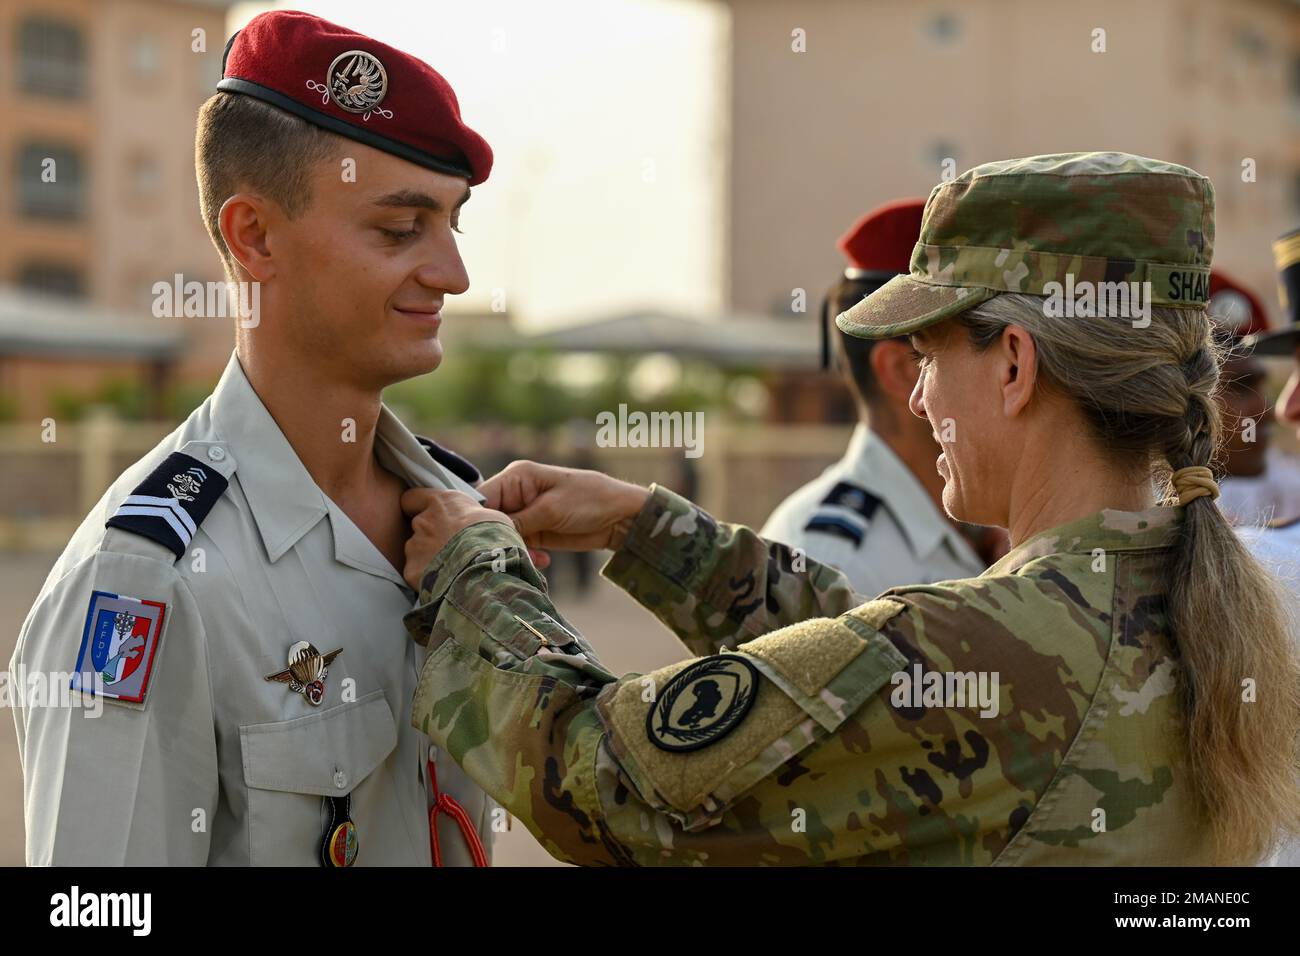 U.S. Army Maj. Gen. Jami Shawley, commanding general of Combined Joint Task Force - Horn of Africa (CJTF-HOA), pins a desert commando badge on a French Soldier during a French Desert Commando Course graduation ceremony at the 5th Overseas Interarms Regiment, Djibouti, June 1, 2022. Members of the CJTF-HOA regularly train and work alongside allies, partners, and government organizations to achieve a unified effort to improve safety, security and prosperity in East Africa. Stock Photo